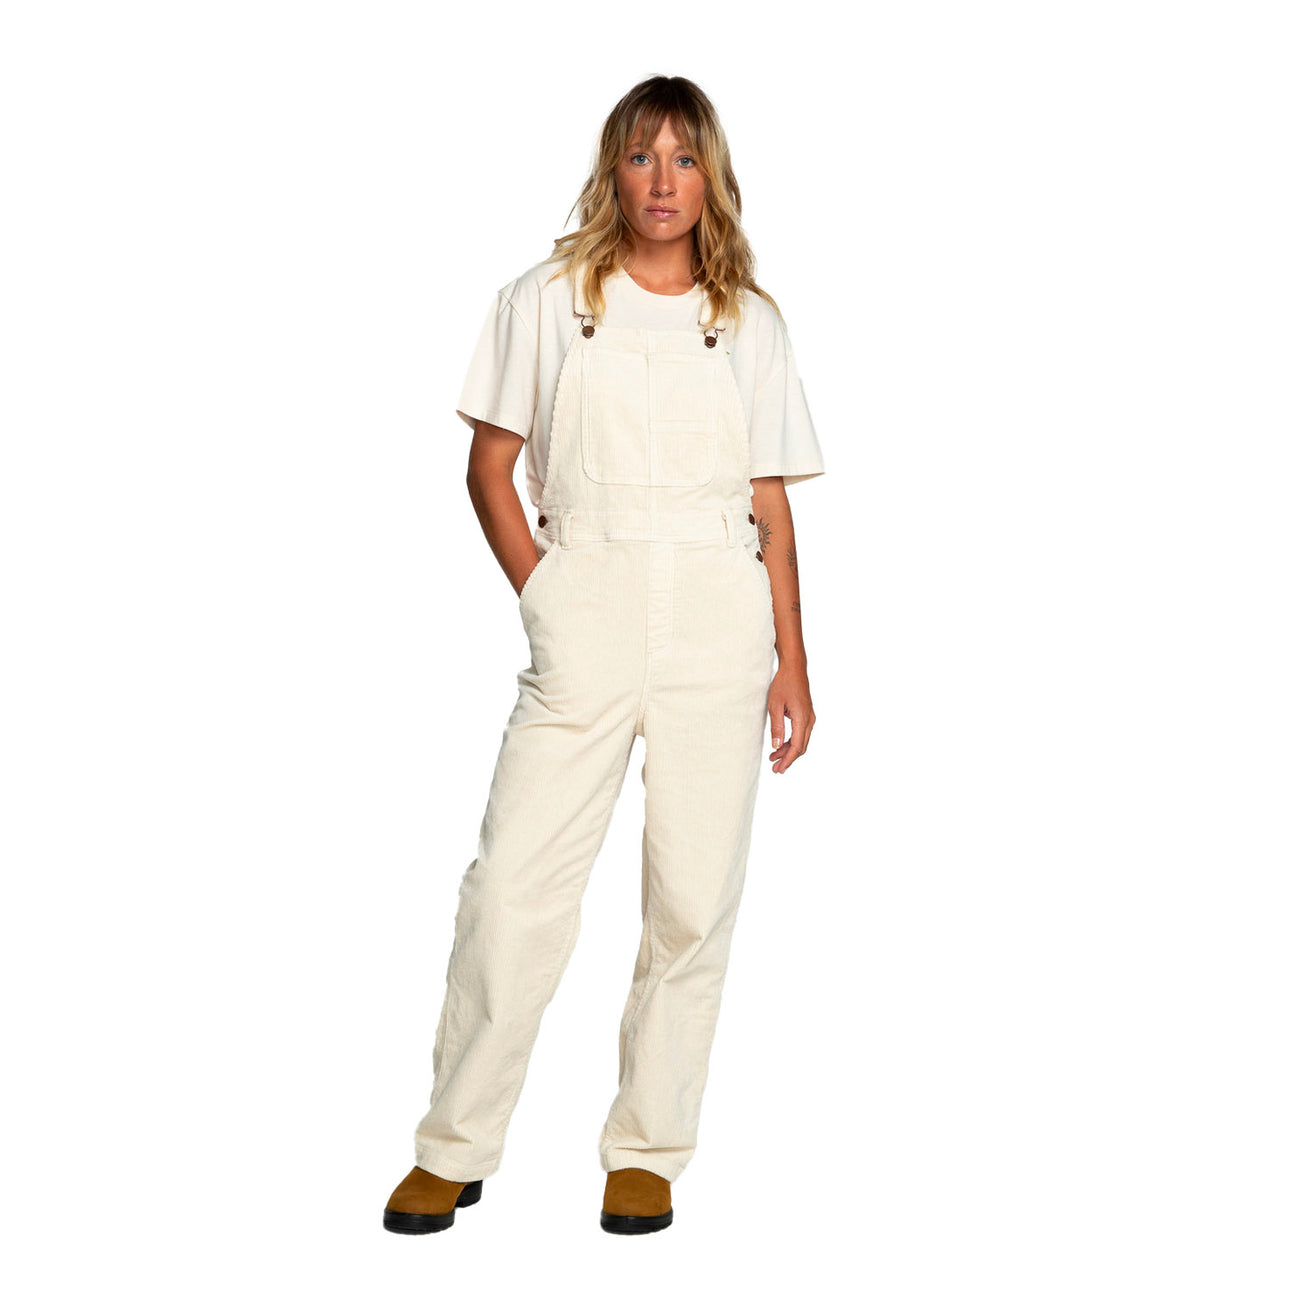 Billabong | Looking For You Dungarees - Antique White